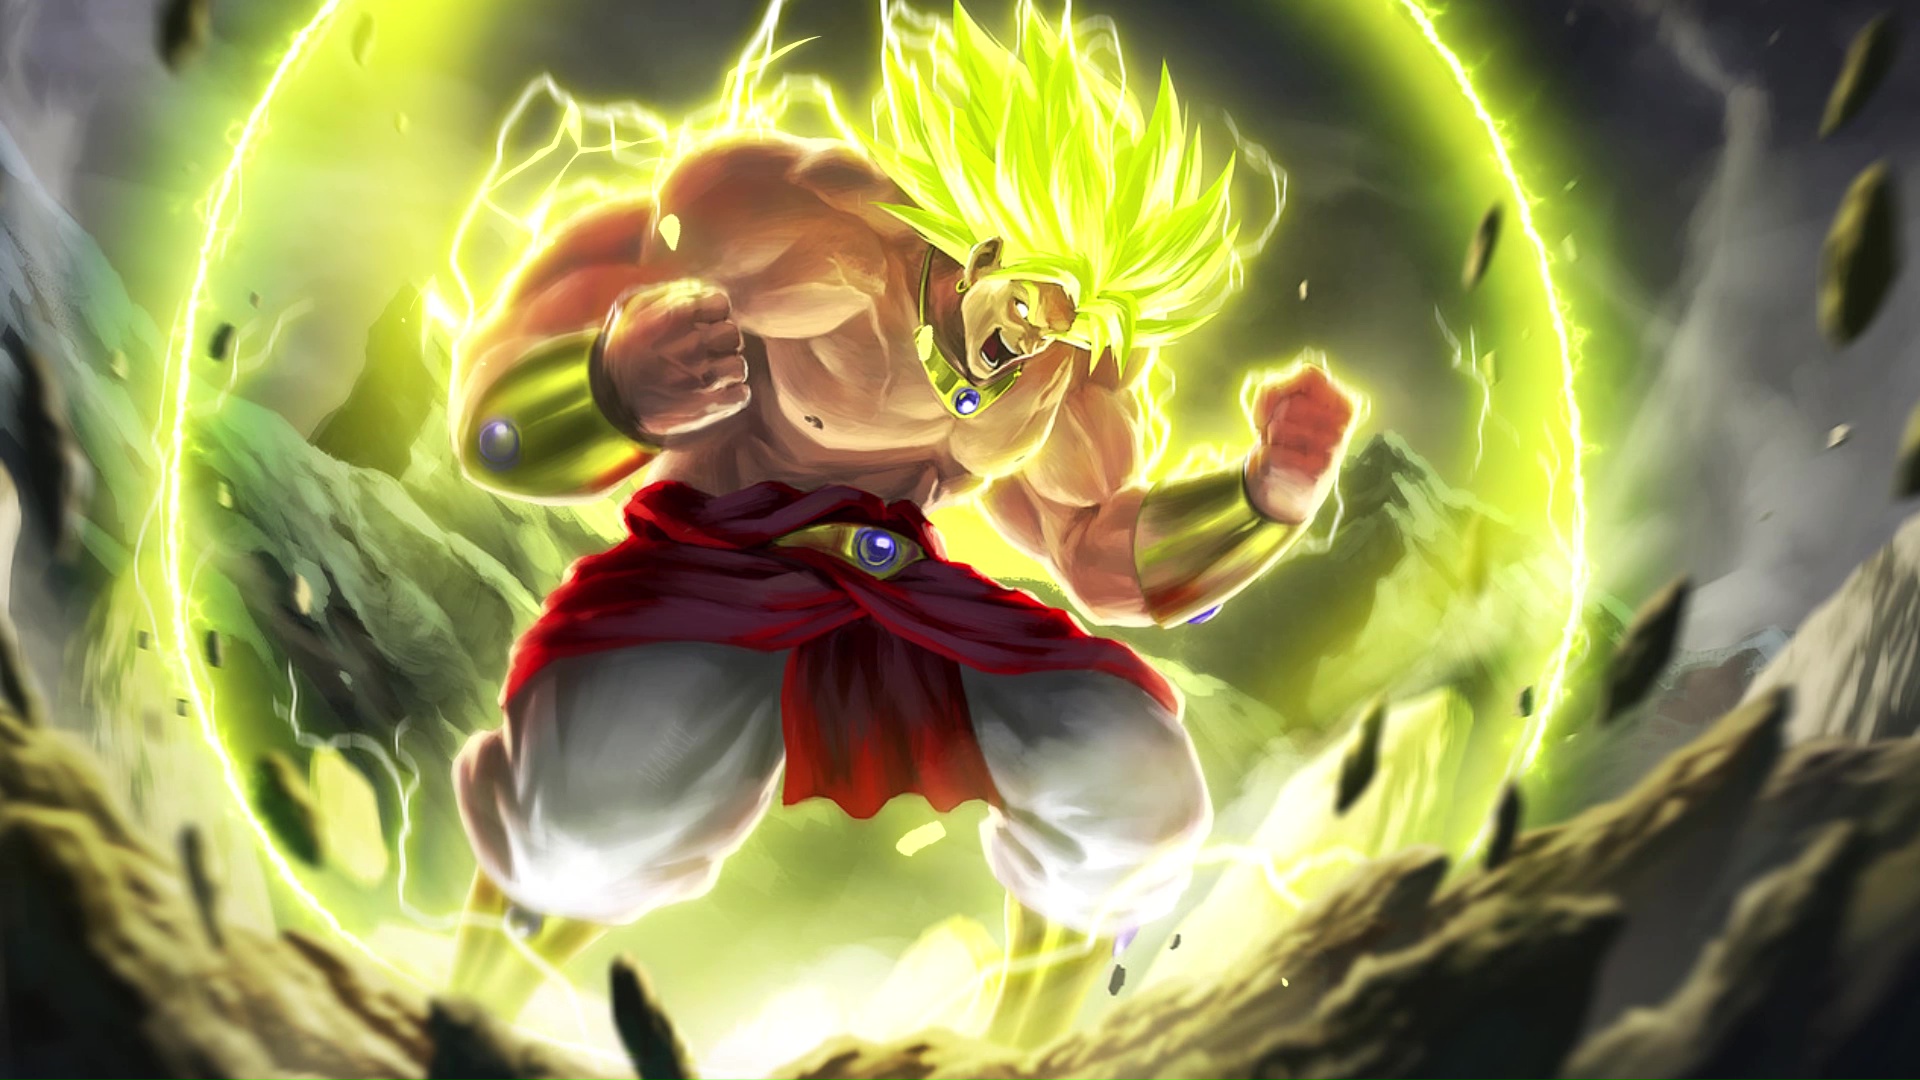 Broly Live Iphone Wallpapers